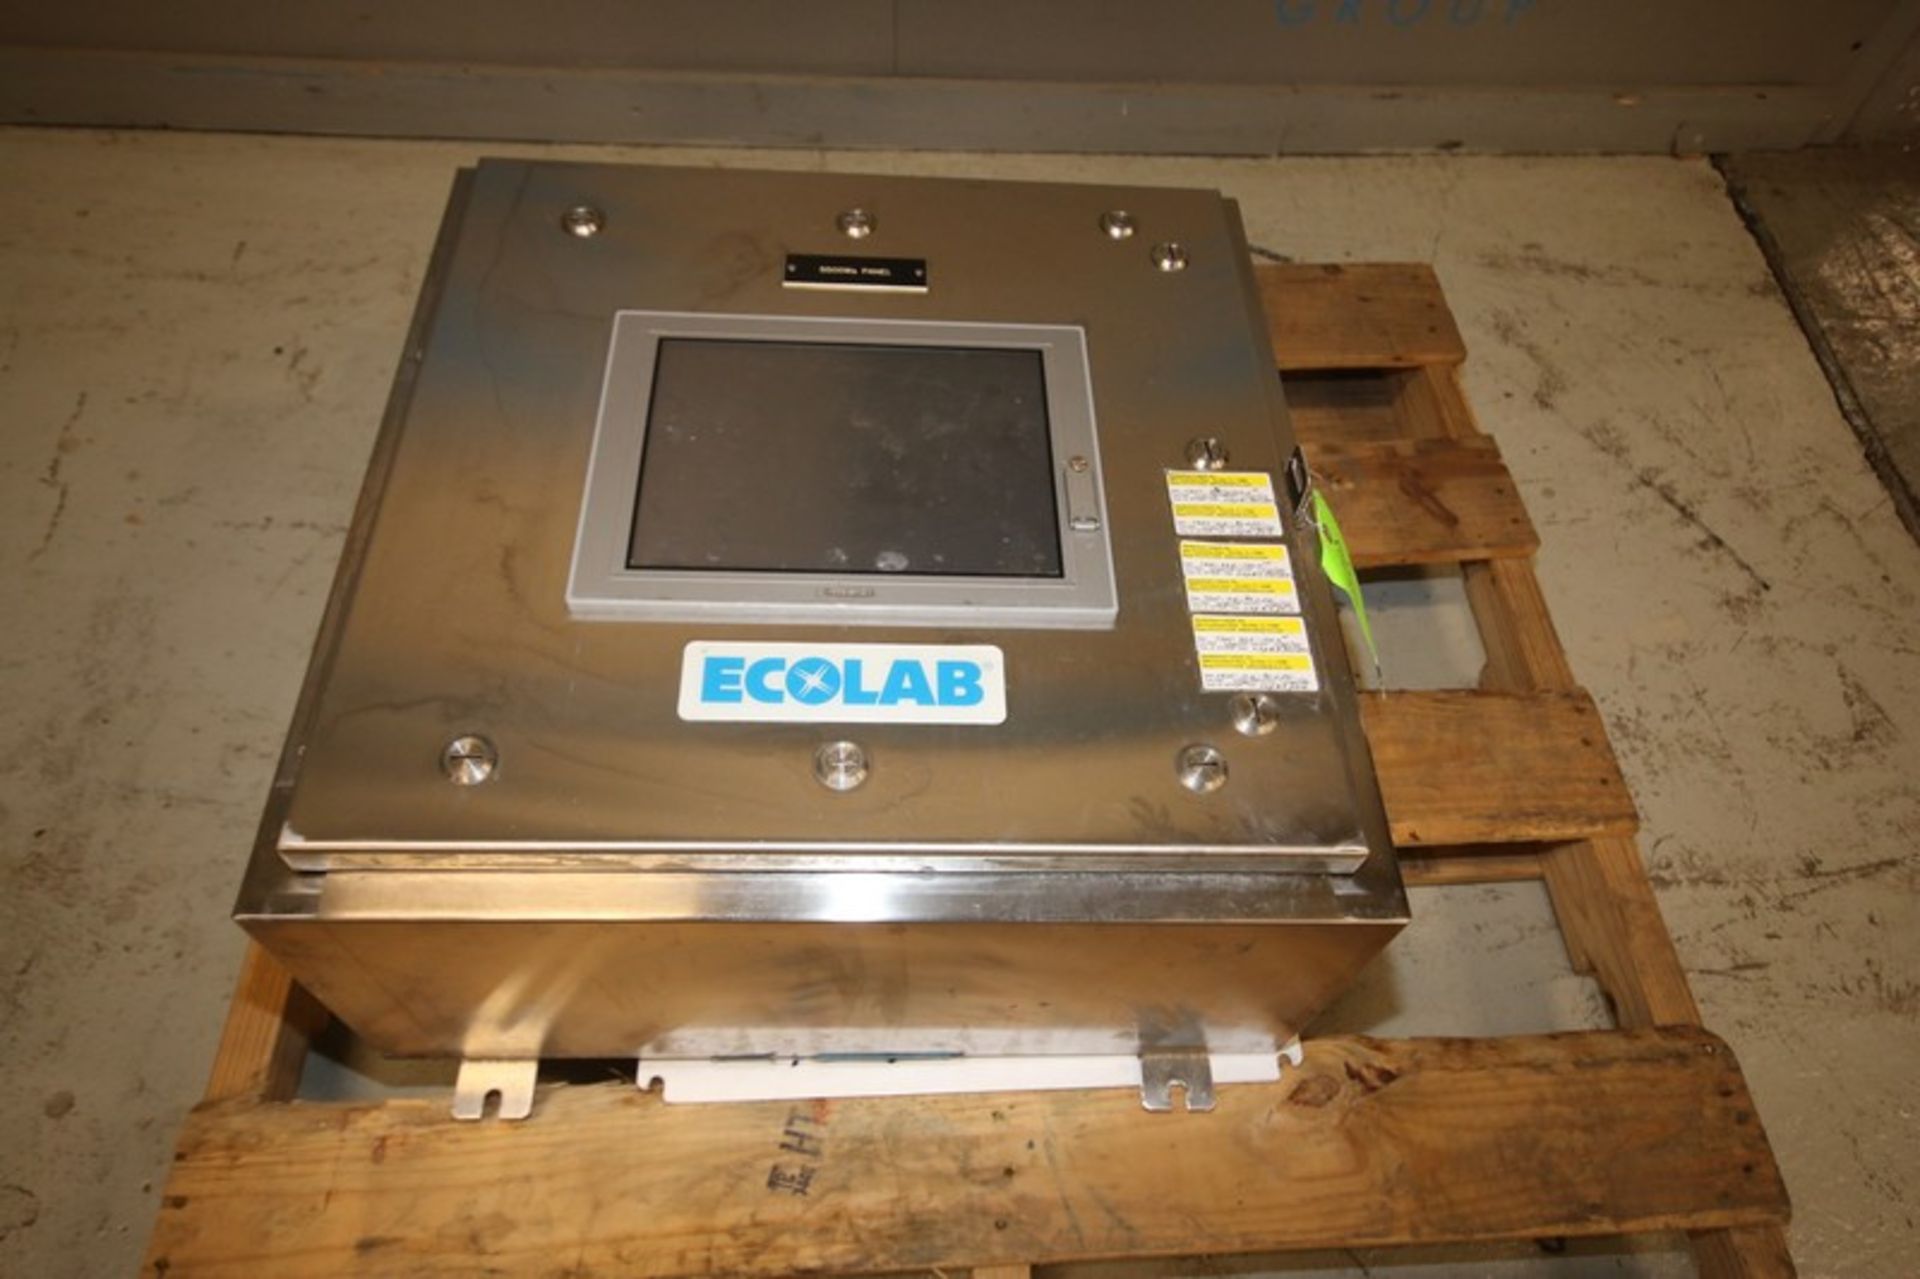 Ecolab 24" W x 24" H x 9" D S/S Control Panel with Proface 12" Display (INV#79964)(Located @ the MDG